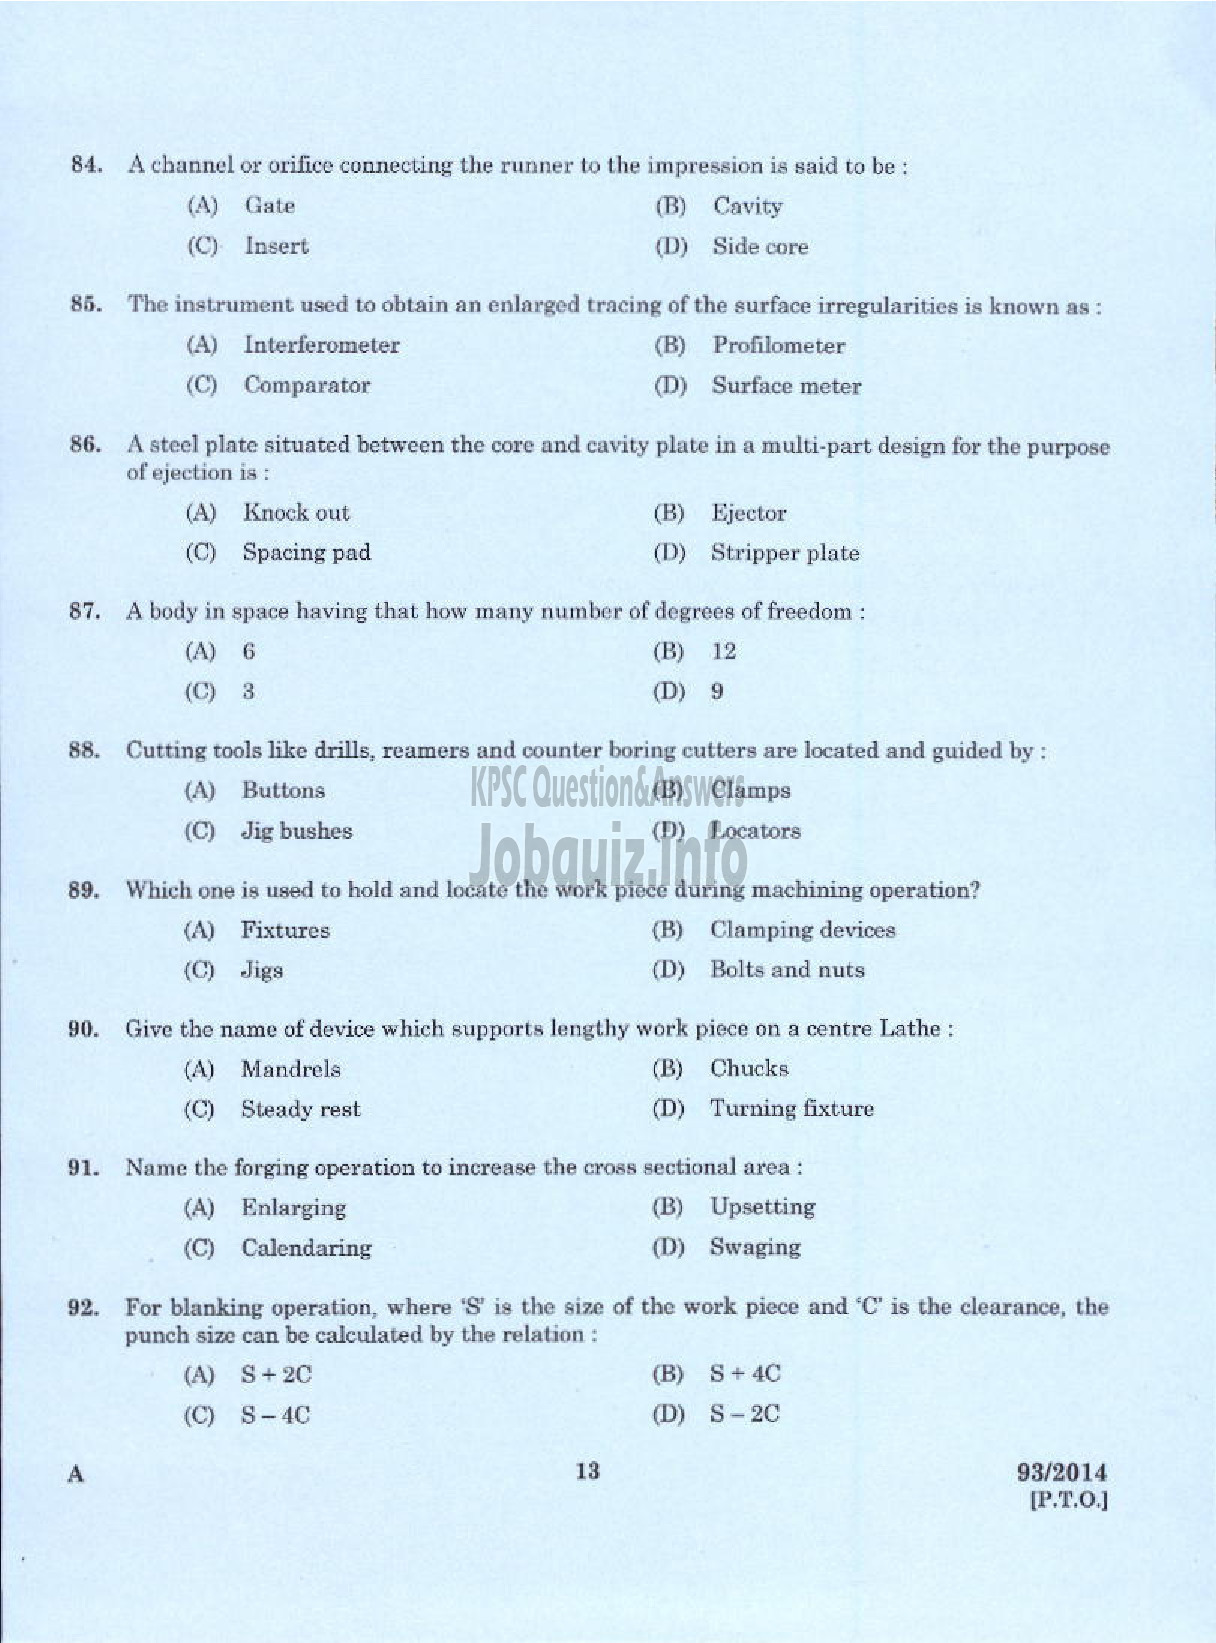 Kerala PSC Question Paper - DEMONSTRATOR IN TOOL AND DIE ENGINEERING TECHNICAL EDUCATION DEPARTMENT-9